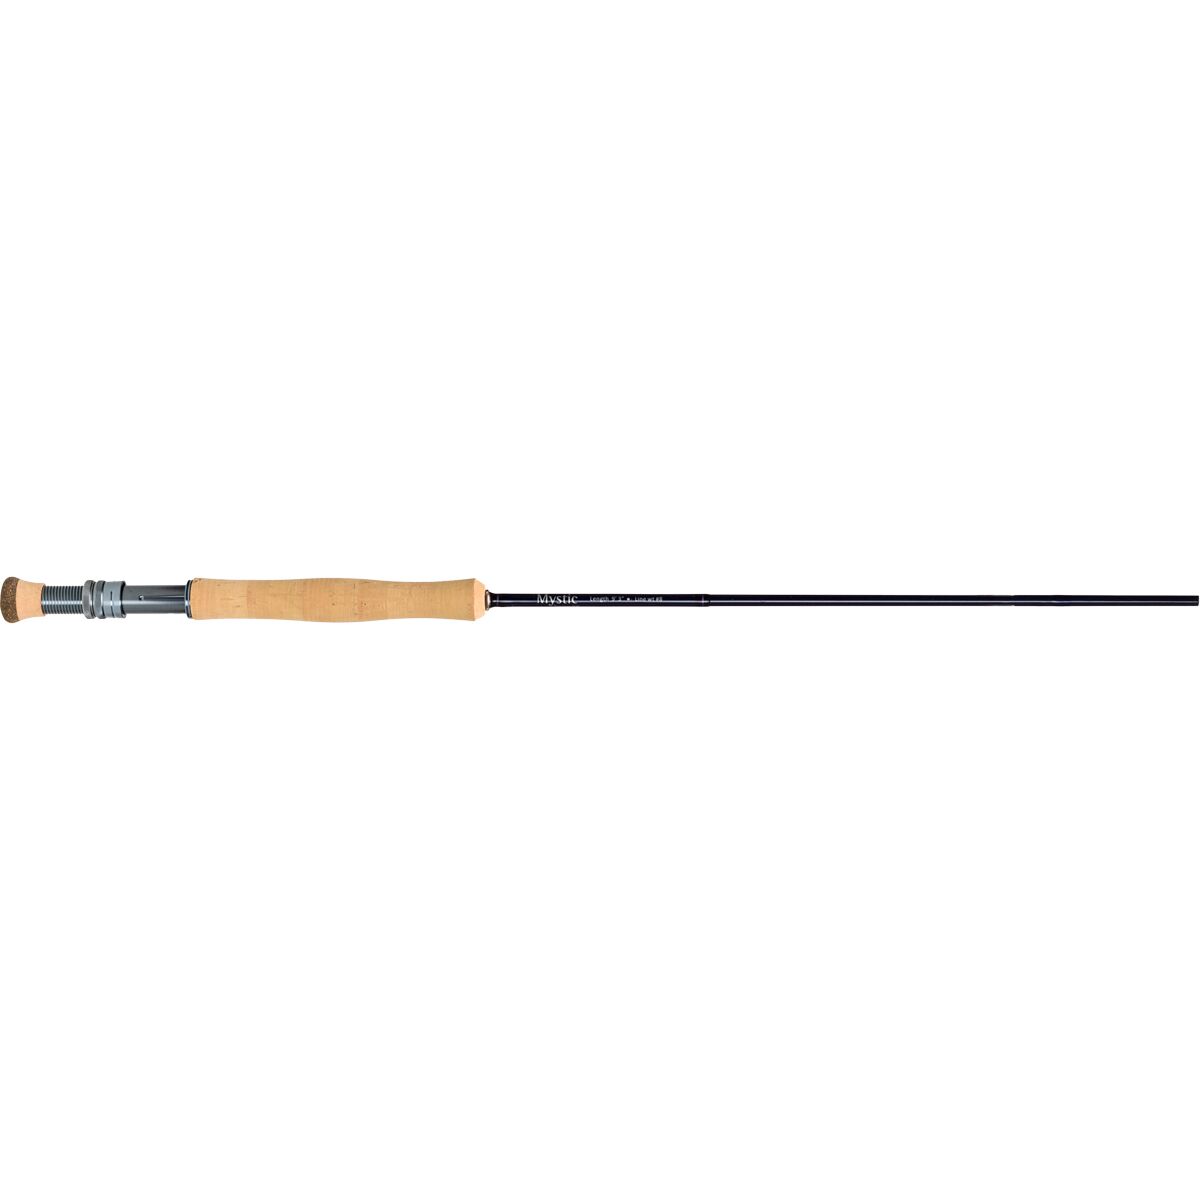 Mystic Rods Tremor Fly Rod Blue, 9ft 3in, 9 Weight product image